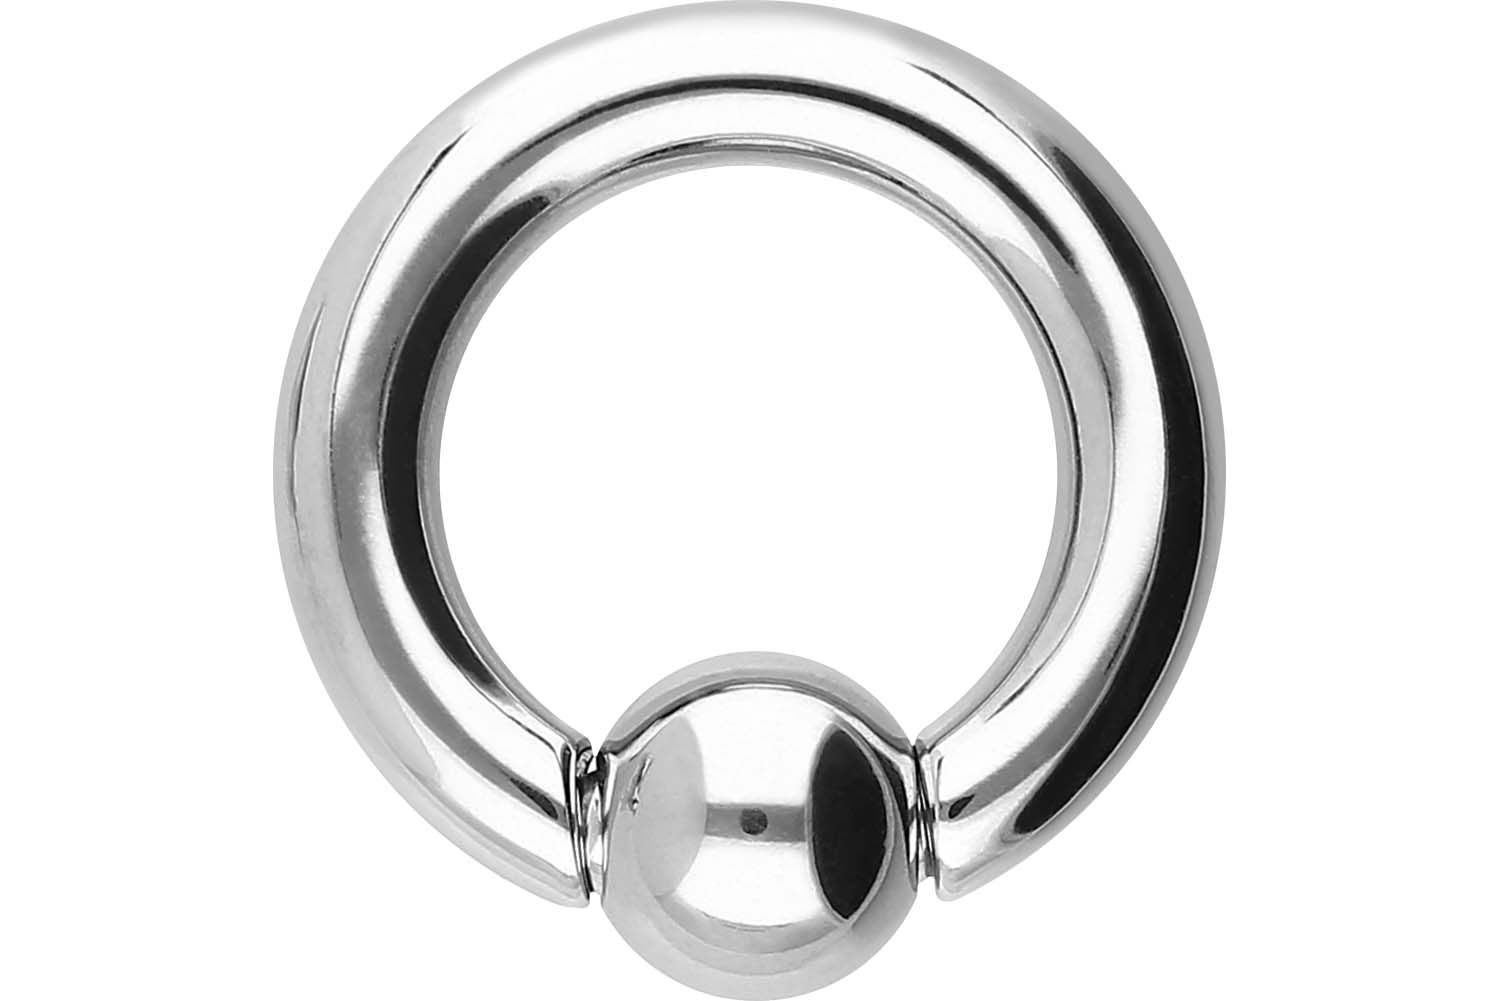 Surgical steel ball closure ring SPRING BALL ++SALE++